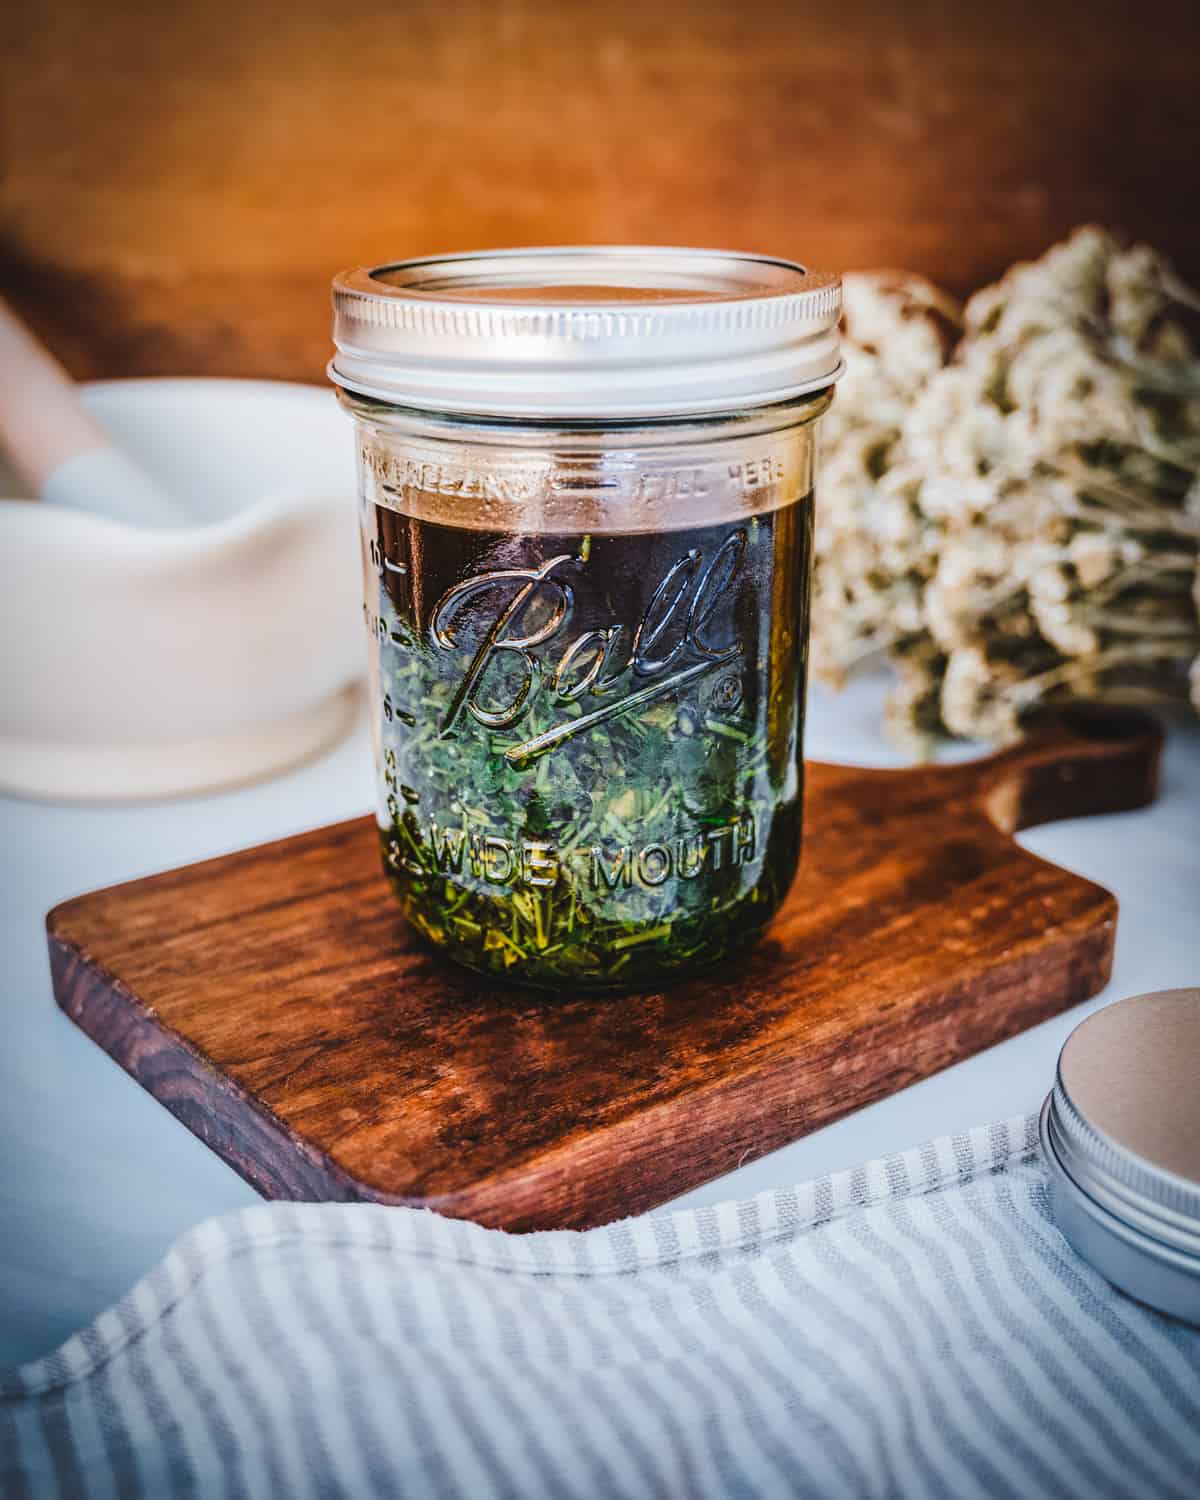 Chickweed infused oil in a glass jar sitting on a wood cutting board. 